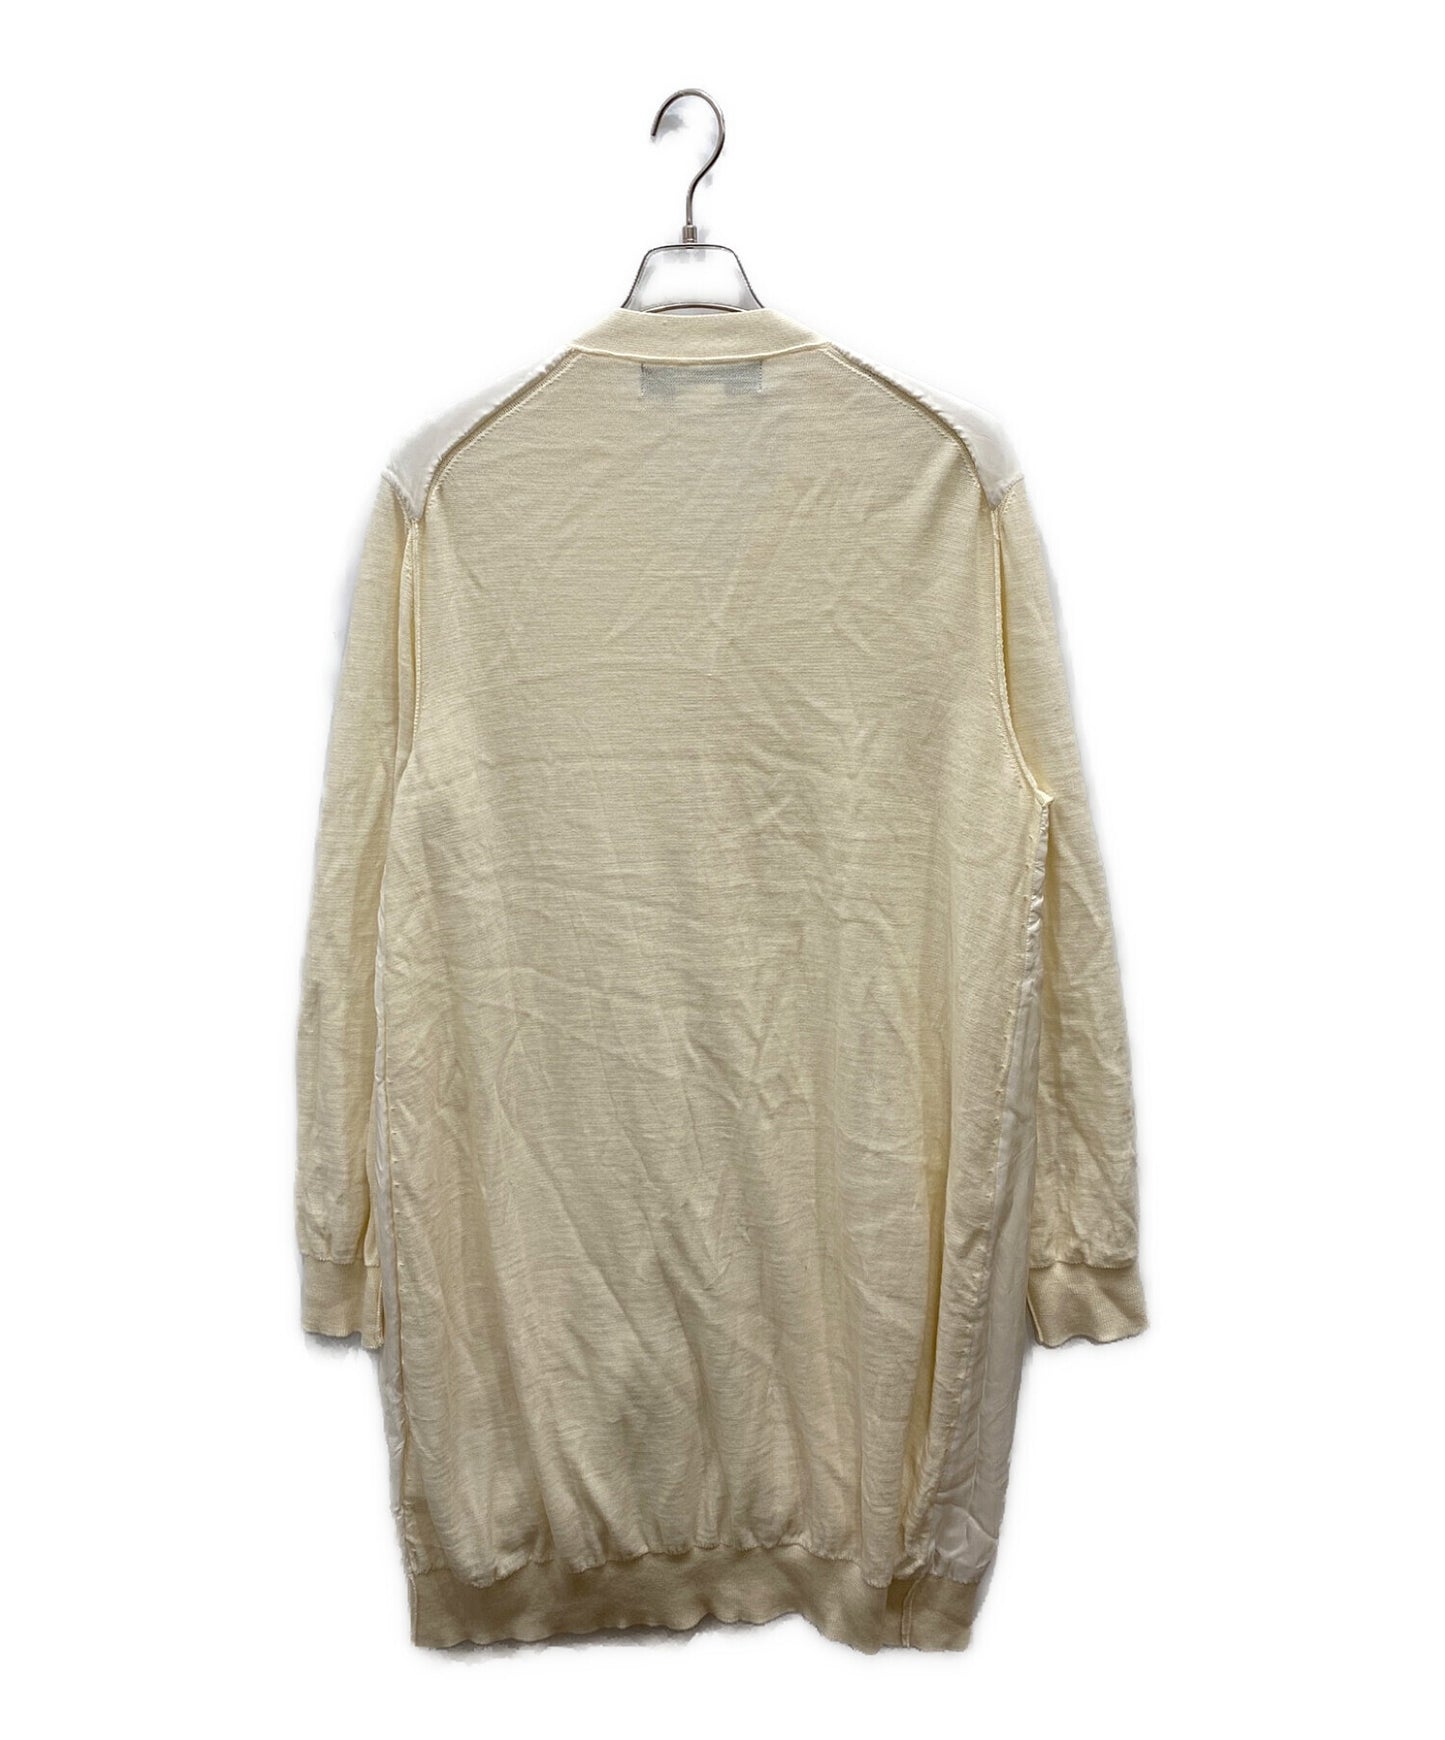 [Pre-owned] COMME des GARCONS HOMME PLUS Long cardigan with different material switching PH-N023